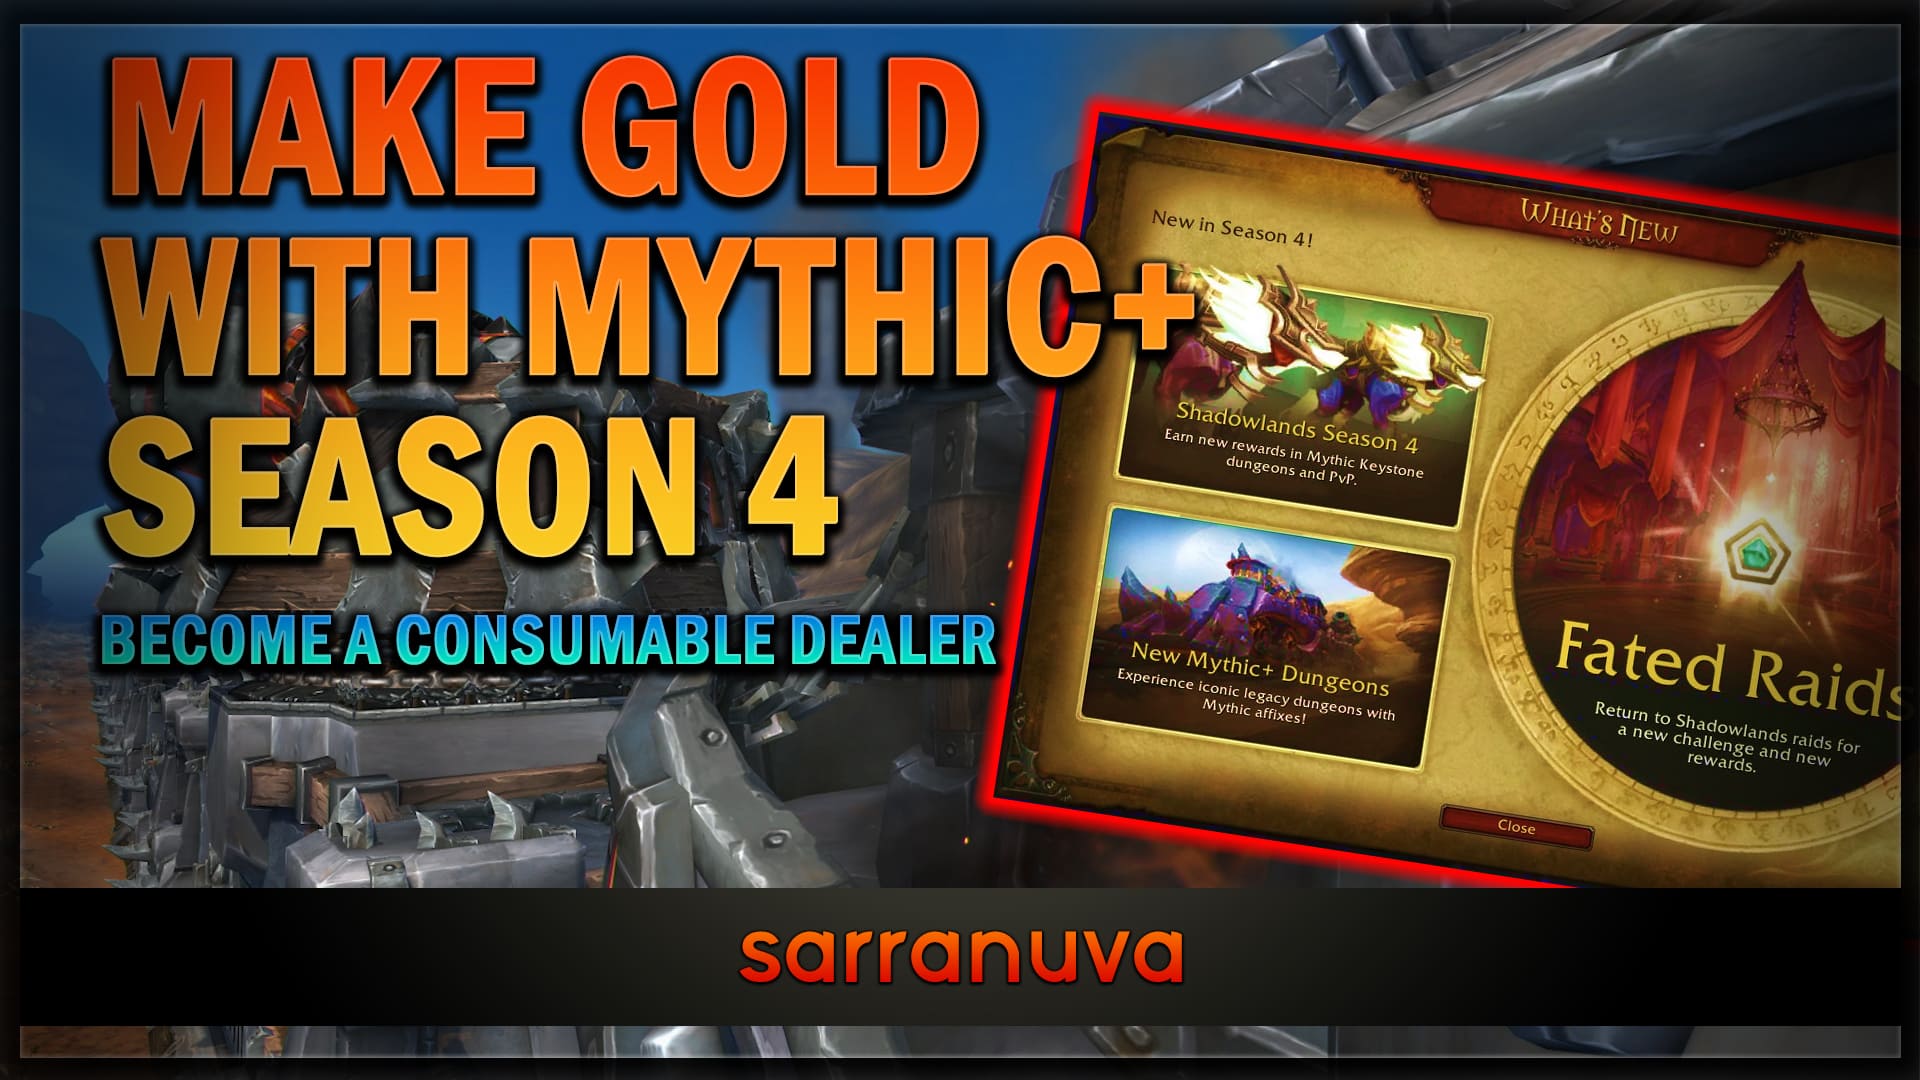 Make Gold With Mythic+ Season 4 in World of Warcraft - Become a Consumable Dealer